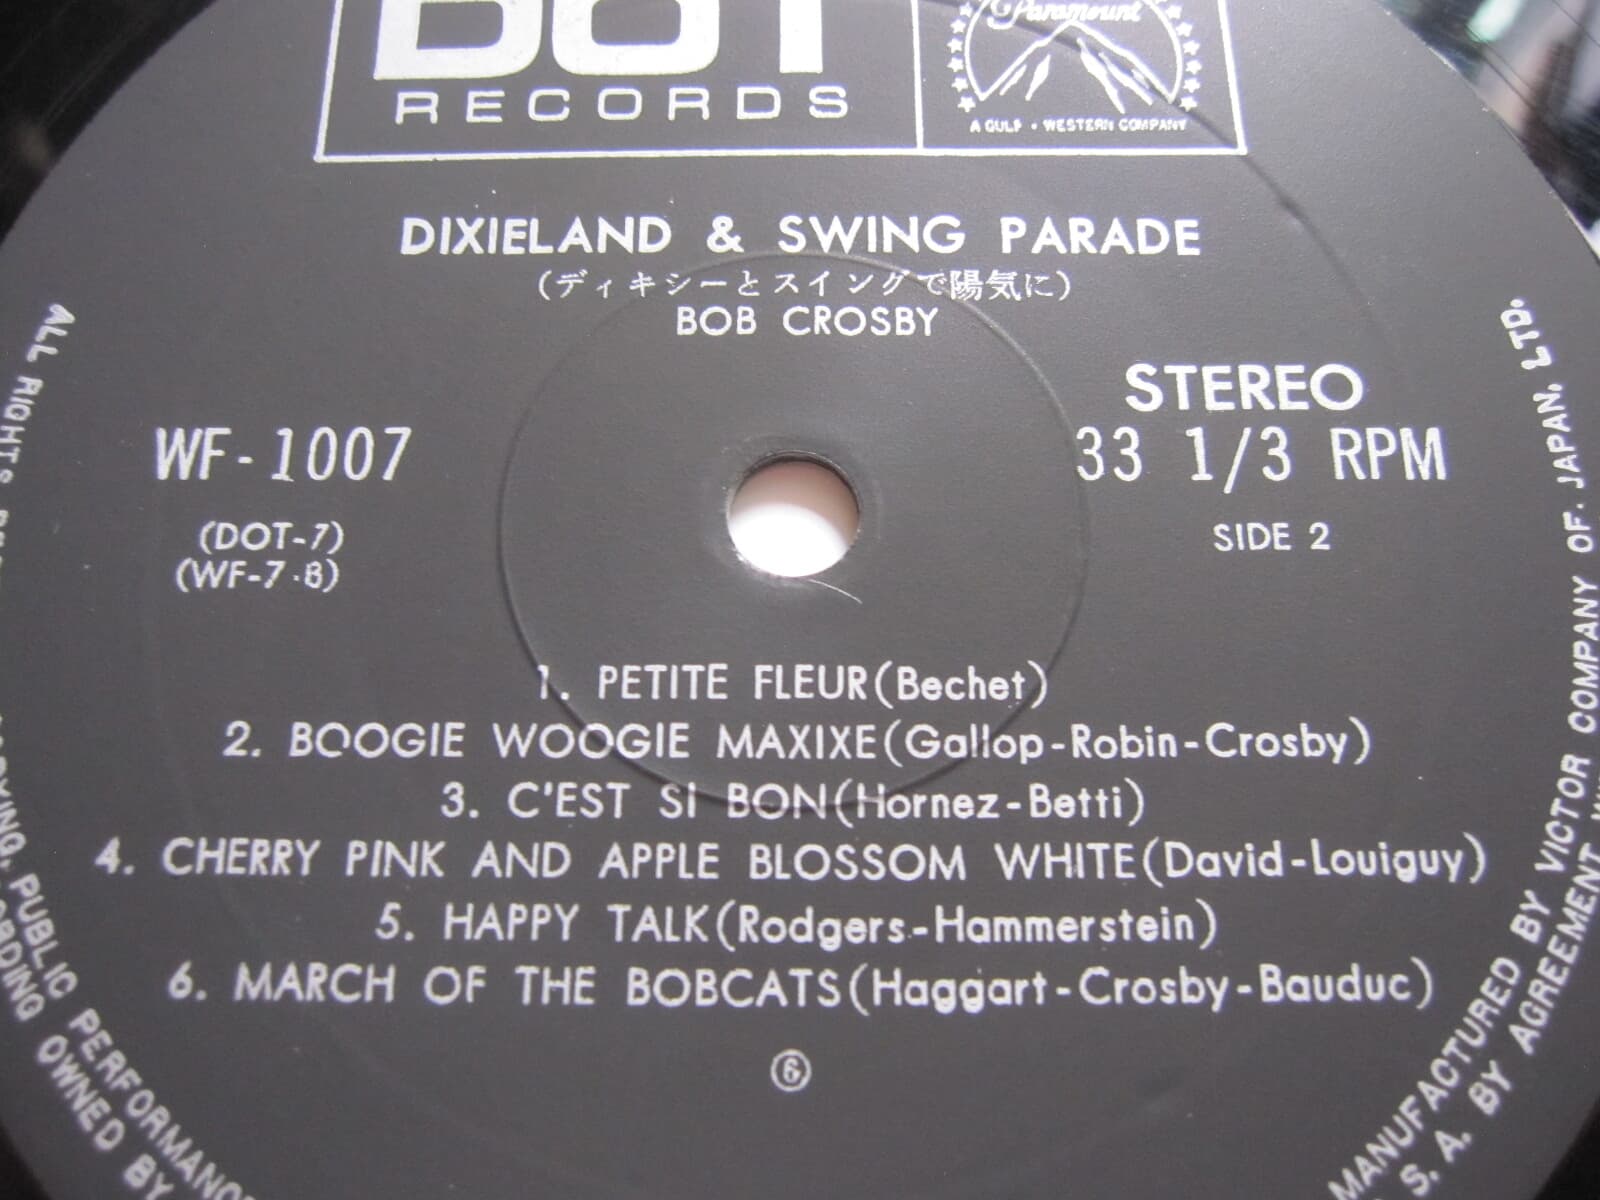 LP(수입)The Best of World Populars Vol.7: Dixieland and Swing Parade- 밥 크로스비